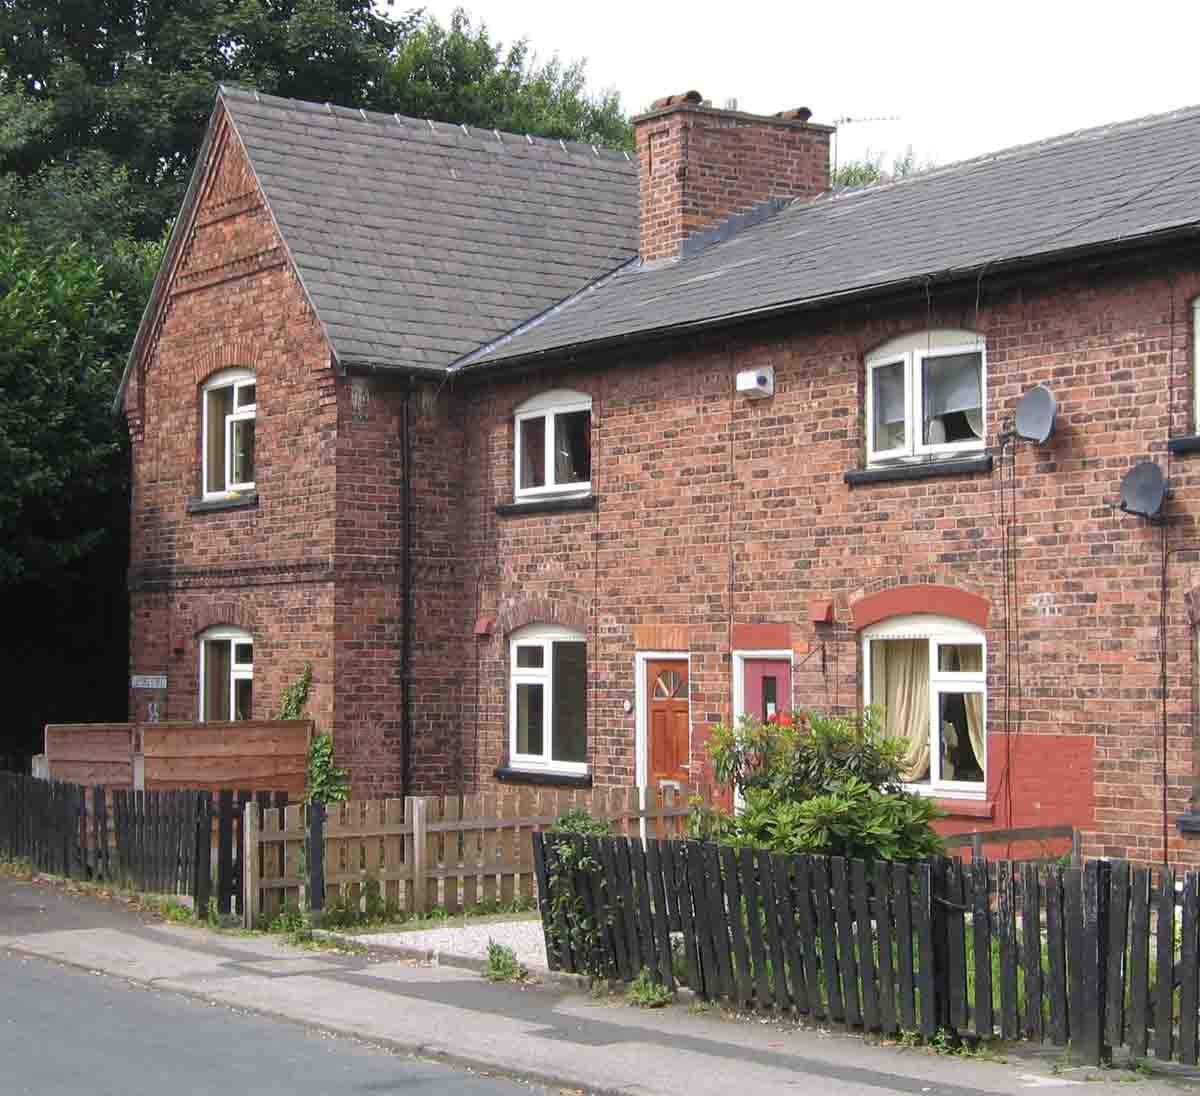 Houses at the south end of Lilford Street, where many of the Atherton Collieries men and their families lived. The trees in the background are growing on the embankment of the old railway. Photo by Peter Wood, May 2005